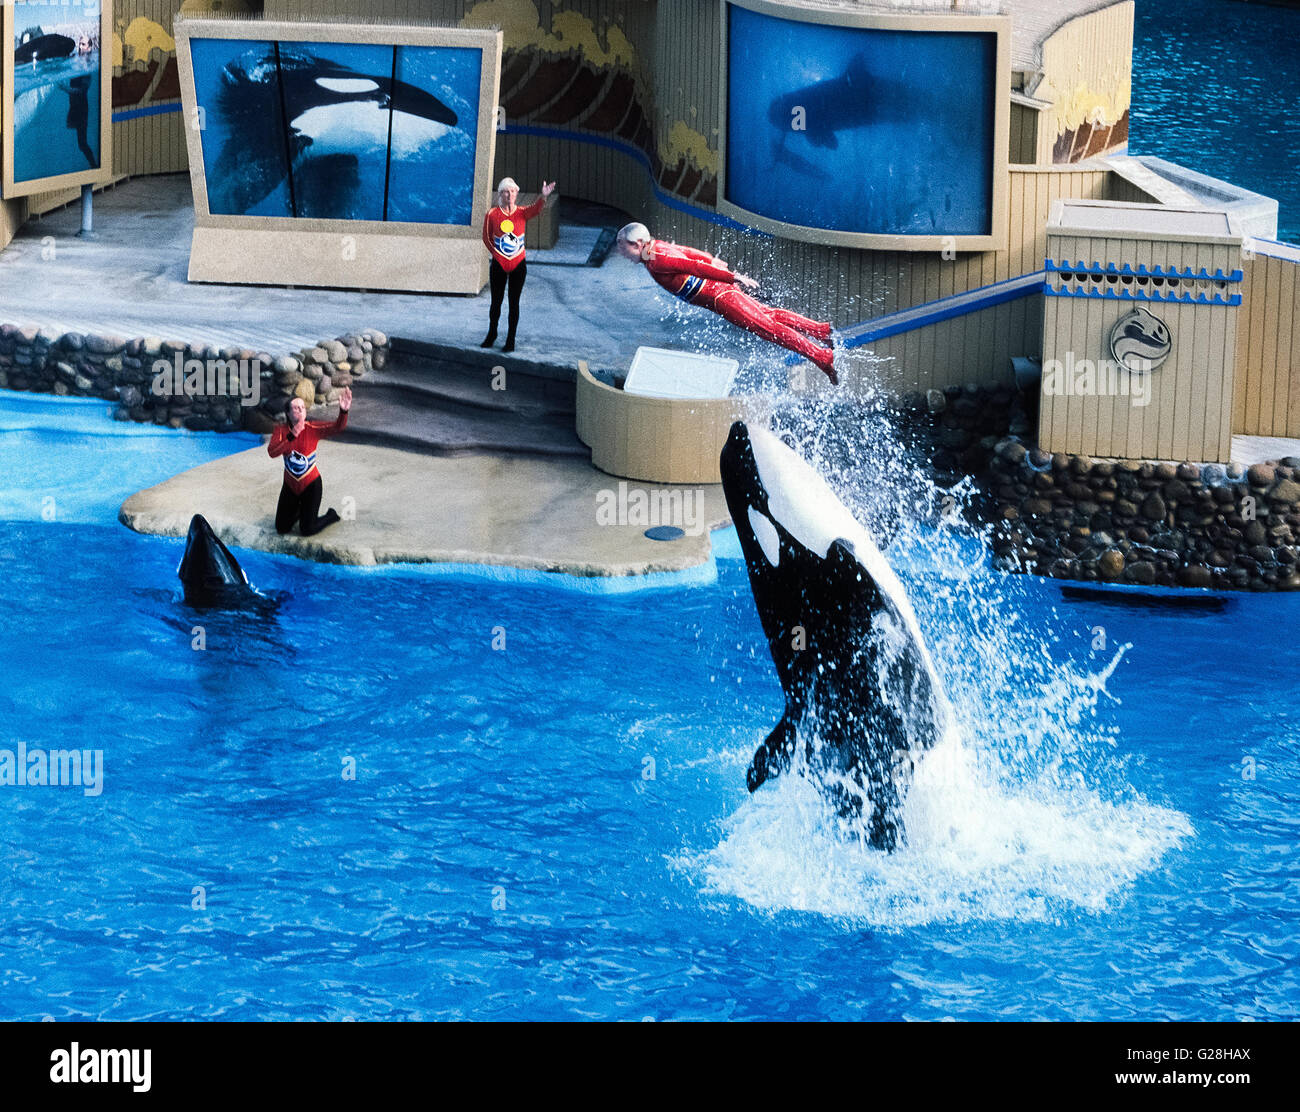 Personal involvement by trainers and spectators with killer whales became a thing of the past in 2016 when SeaWorld announced it would stop any human hands-on participation during its orca whale shows at the company's three marine theme parks in California, Florida and Texas. Public outrage about treatment of the wild animals and injuries and deaths of their trainers contributed to the decision. In this 1988 photo at SeaWorld San Diego in California, USA, a trainer is being flipped into the air after riding on the head of the whale during the 'Shamu Show. ' Stock Photo